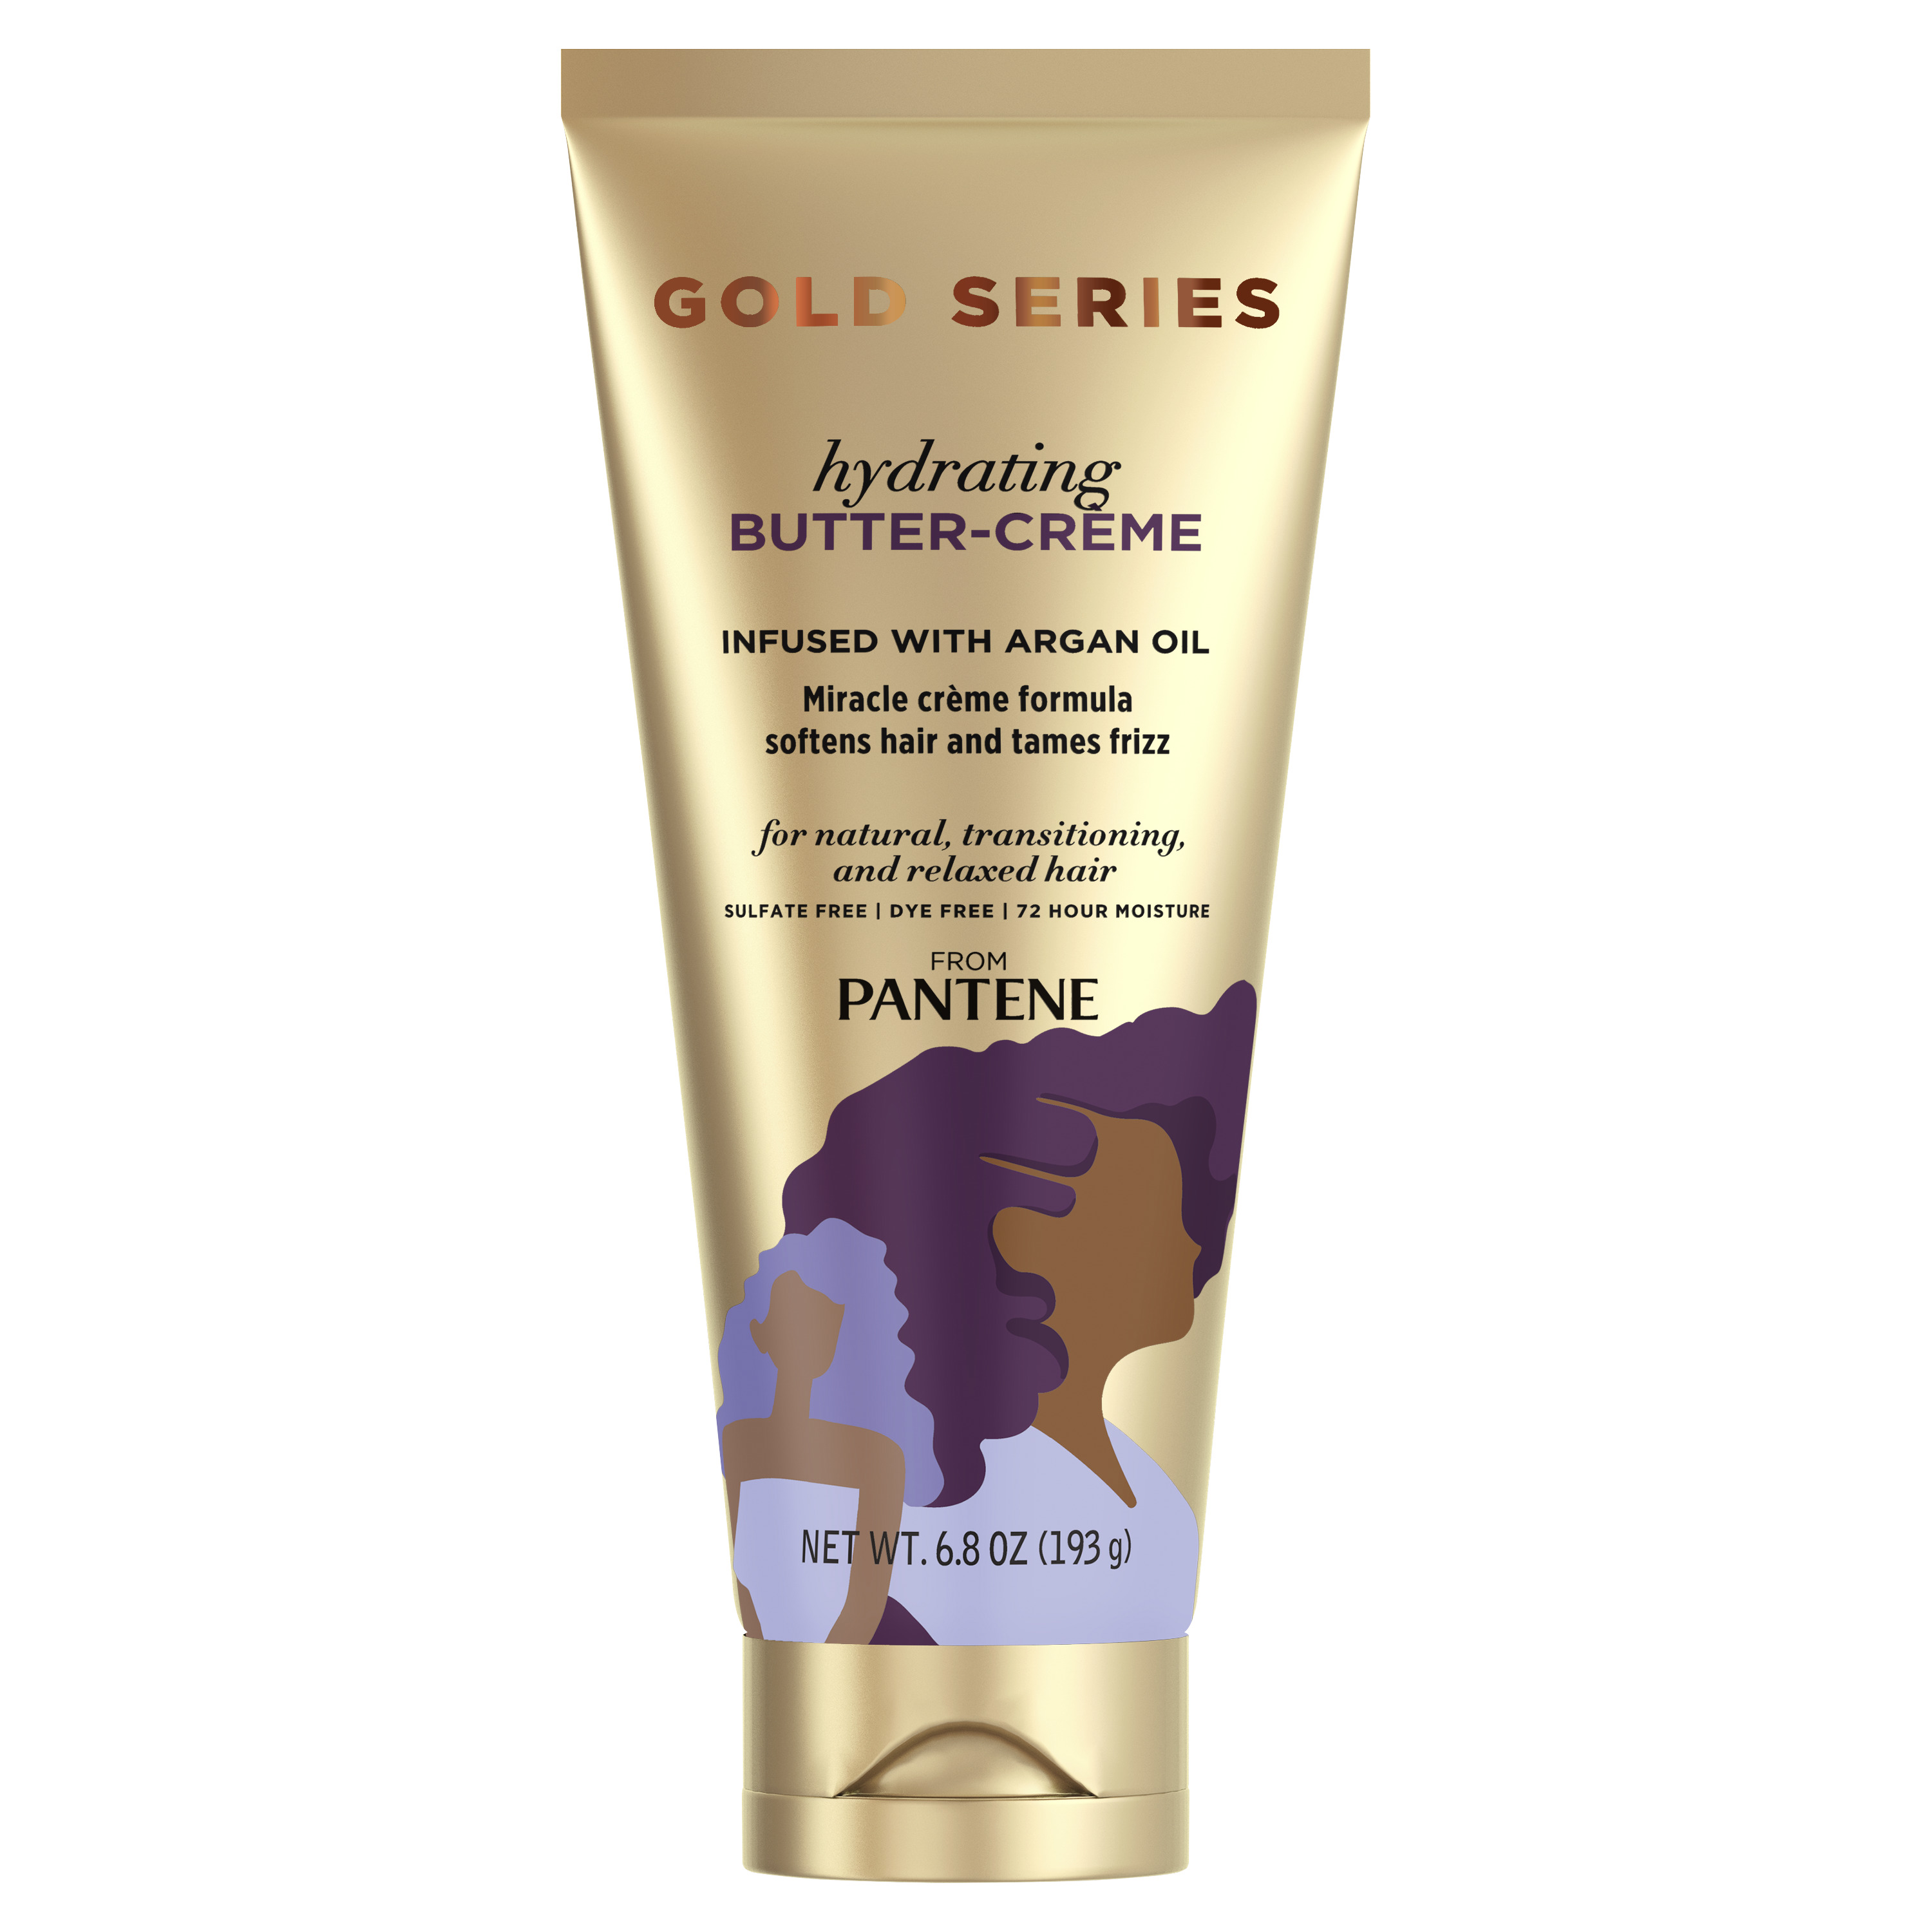 6.8-Oz Pantene Gold Series Hydrating & Sulfate Free Butter Cream $3.55 + Free Store Pickup at Walmart, Free Shipping w/ Walmart+ or on $35+